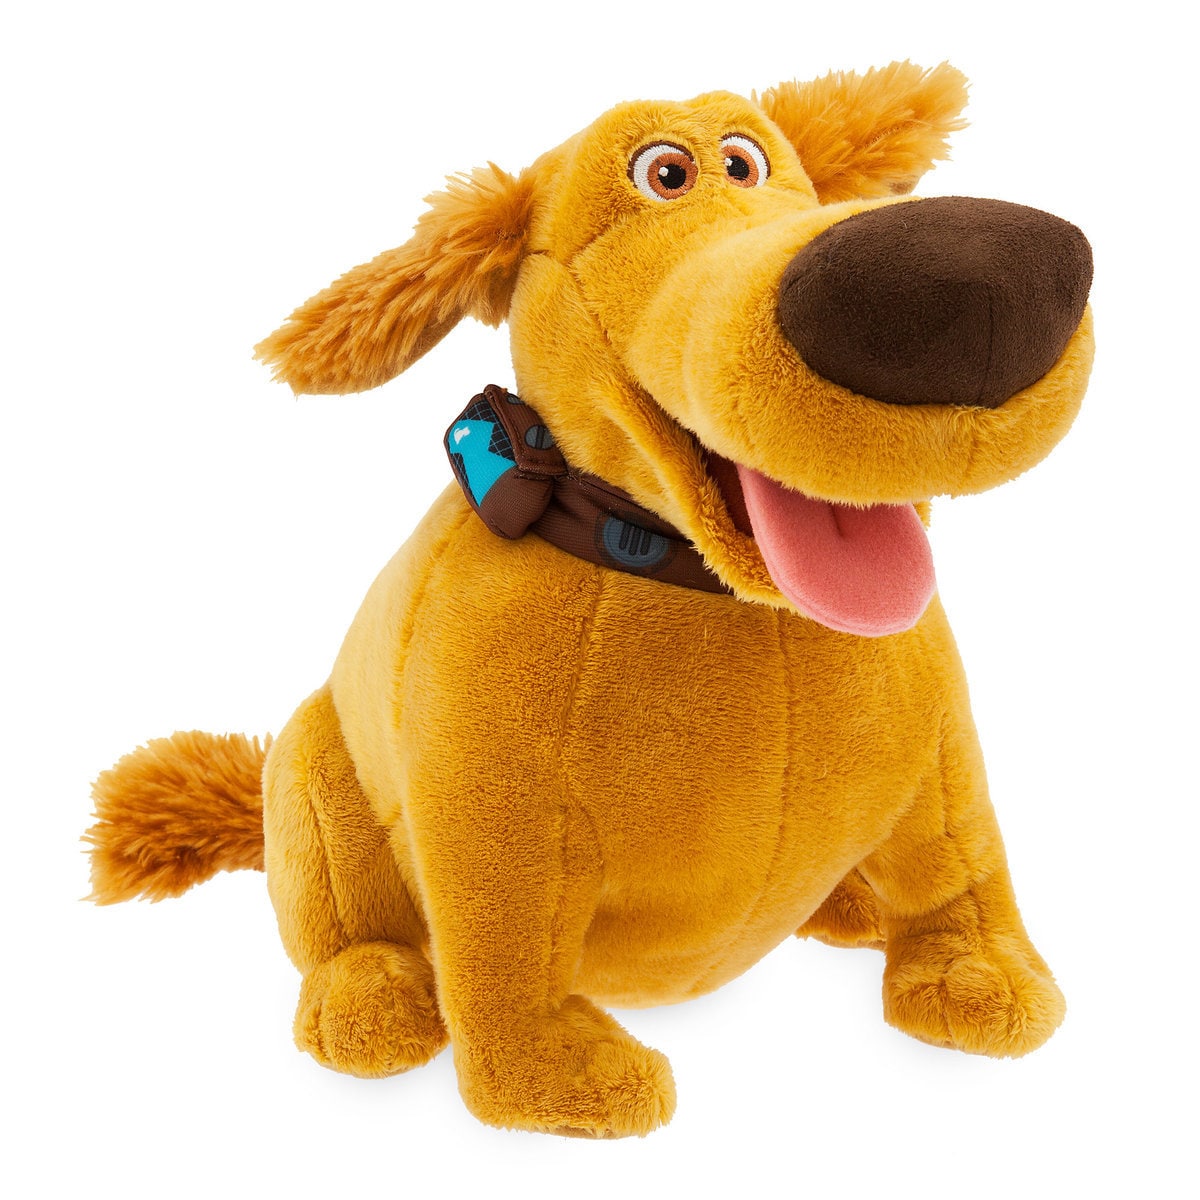 Disney Store Dug from Up 10th Anniversary Medium Plush New with Tags